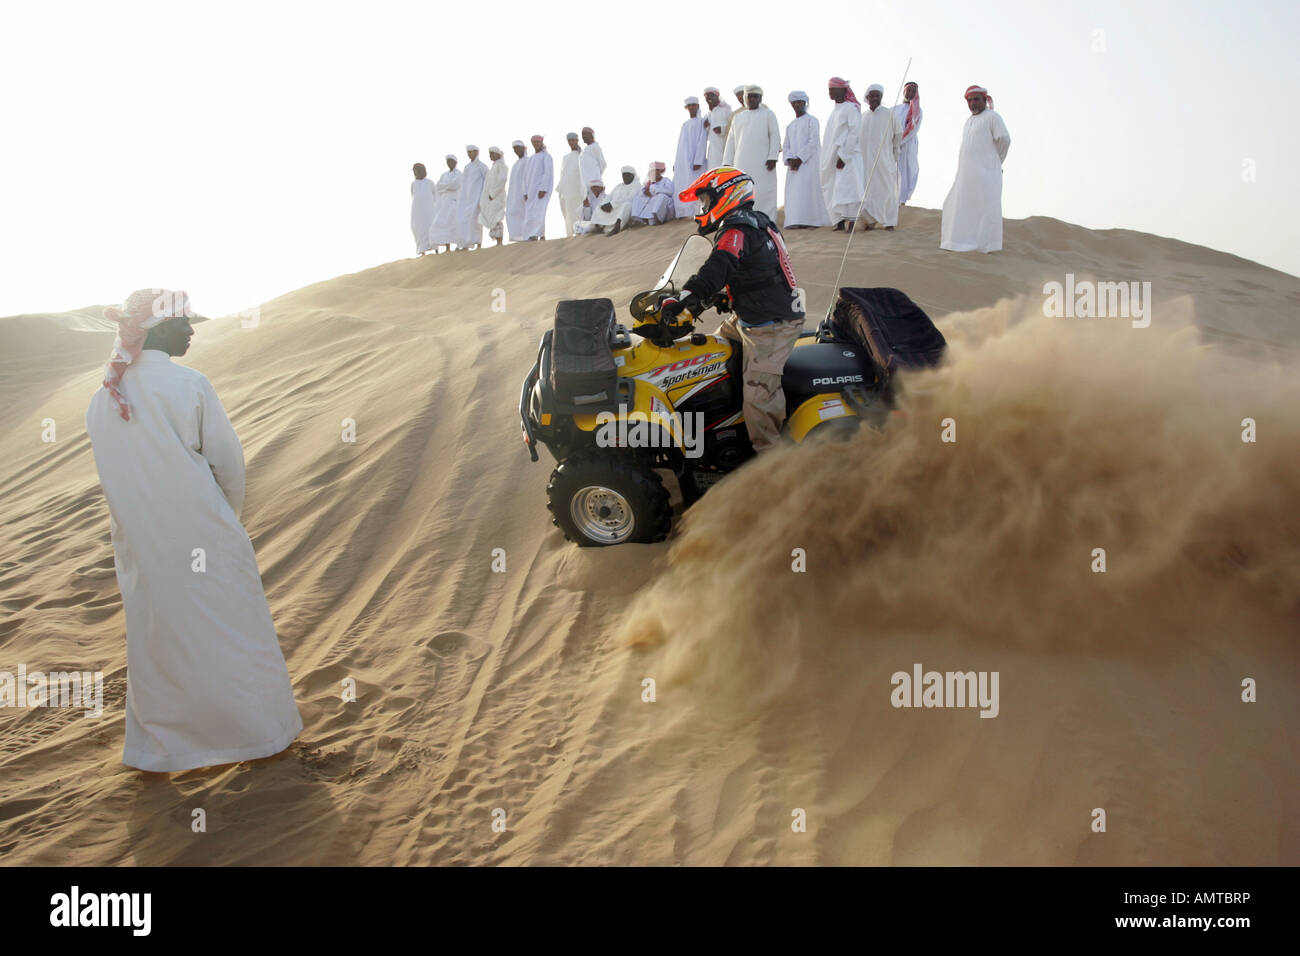 Group of Arab men in the desert watching a quad rider Stock Photo